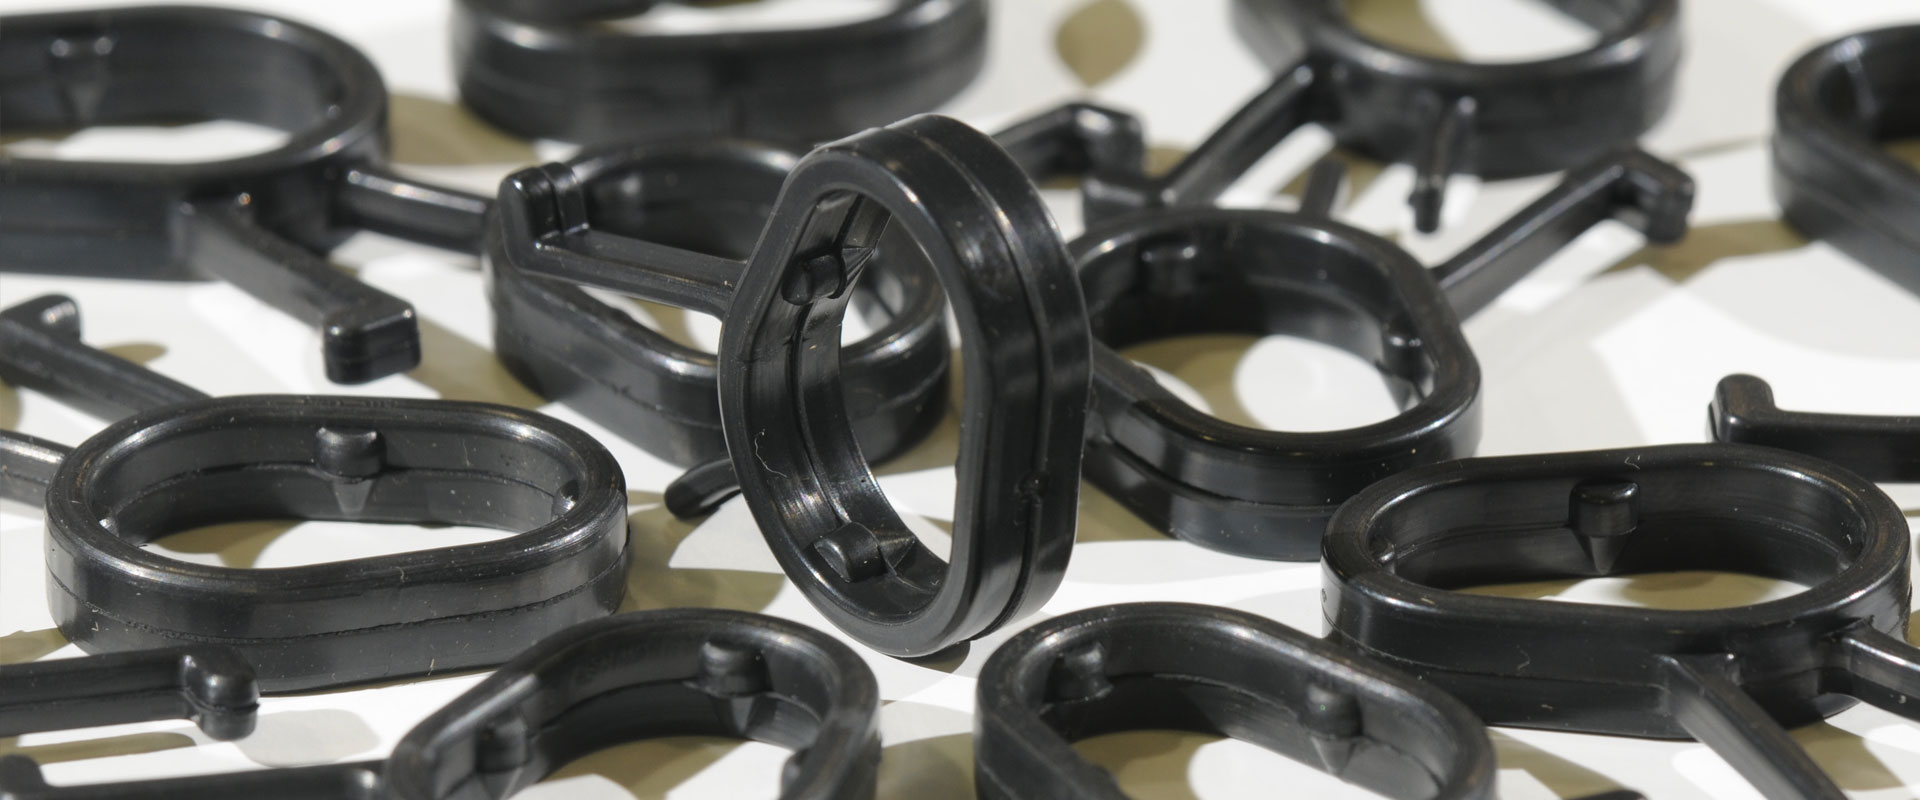 Rubber Injection Molding for Comdaco Rubber Manufacturing Services in Kansas City Missouri